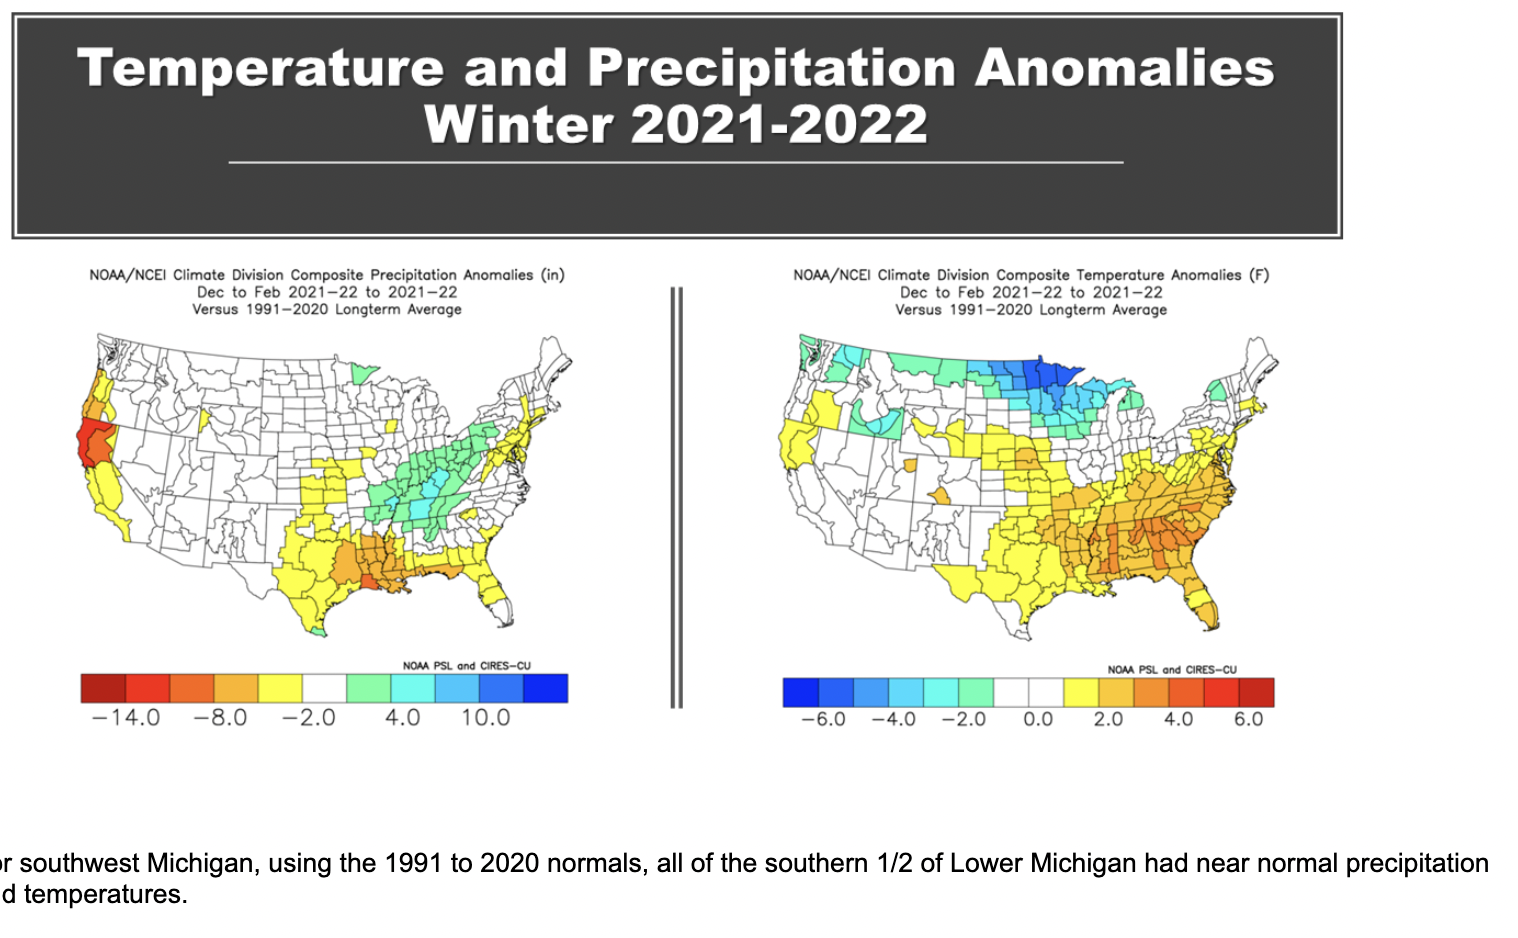 How does the 2021/2022 winter season compare to past winters